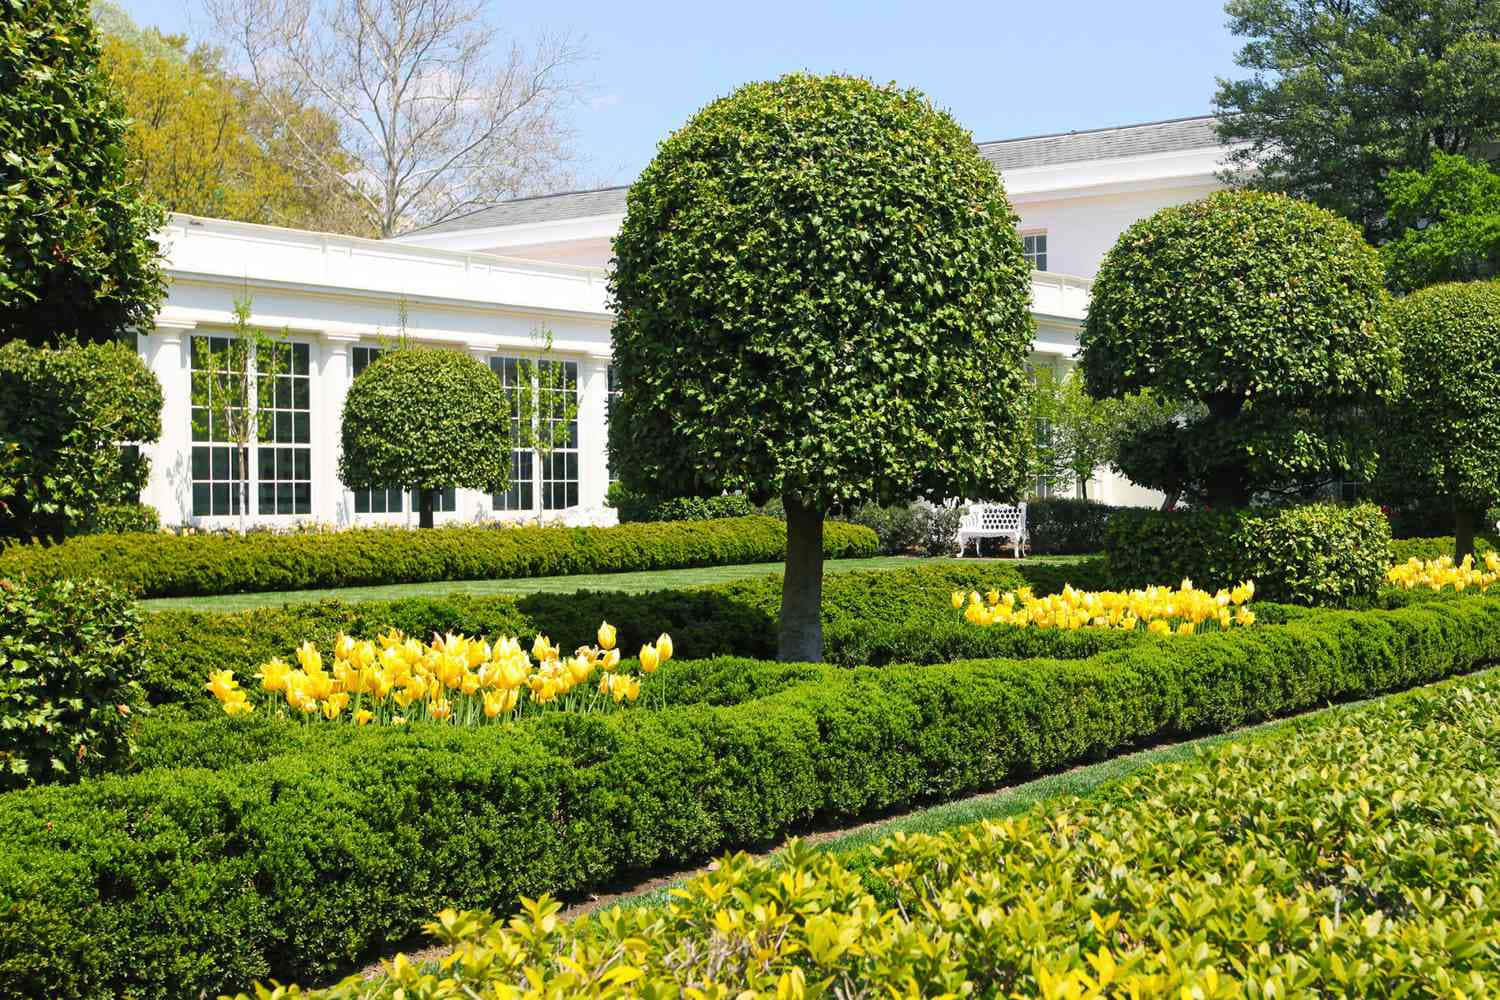 The White House Has A Large Garden With Many Trees